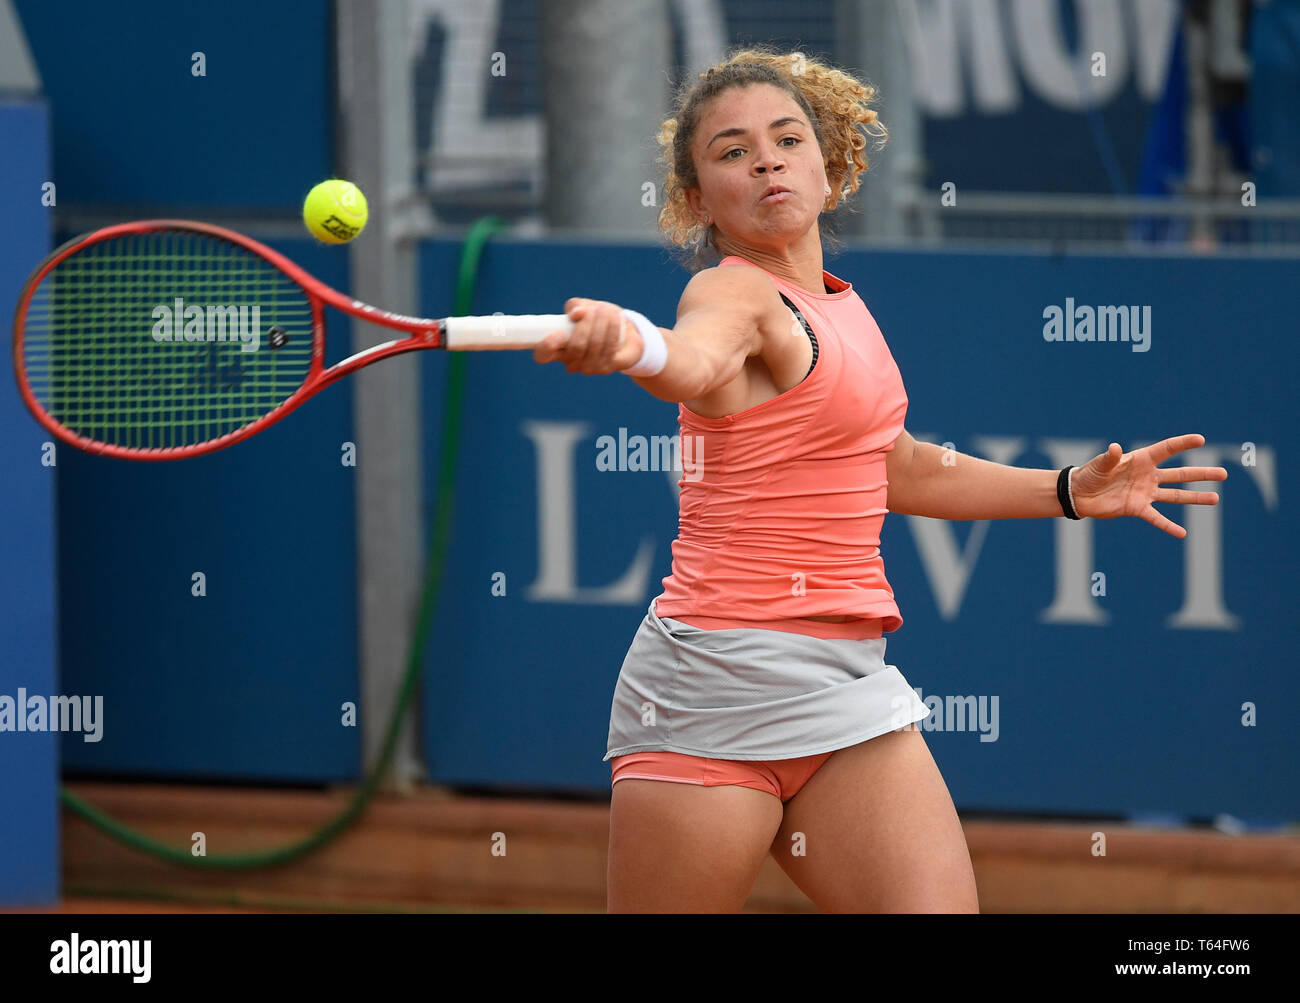 Prague, Czech Republic. 28th Apr, 2019. Tennis player Jasmine Paolini  (Italy) in action during a qualifying match against Tereza Smitkova (Czech)  within the J&T Banka Prague Open, on April 28, 2019, in